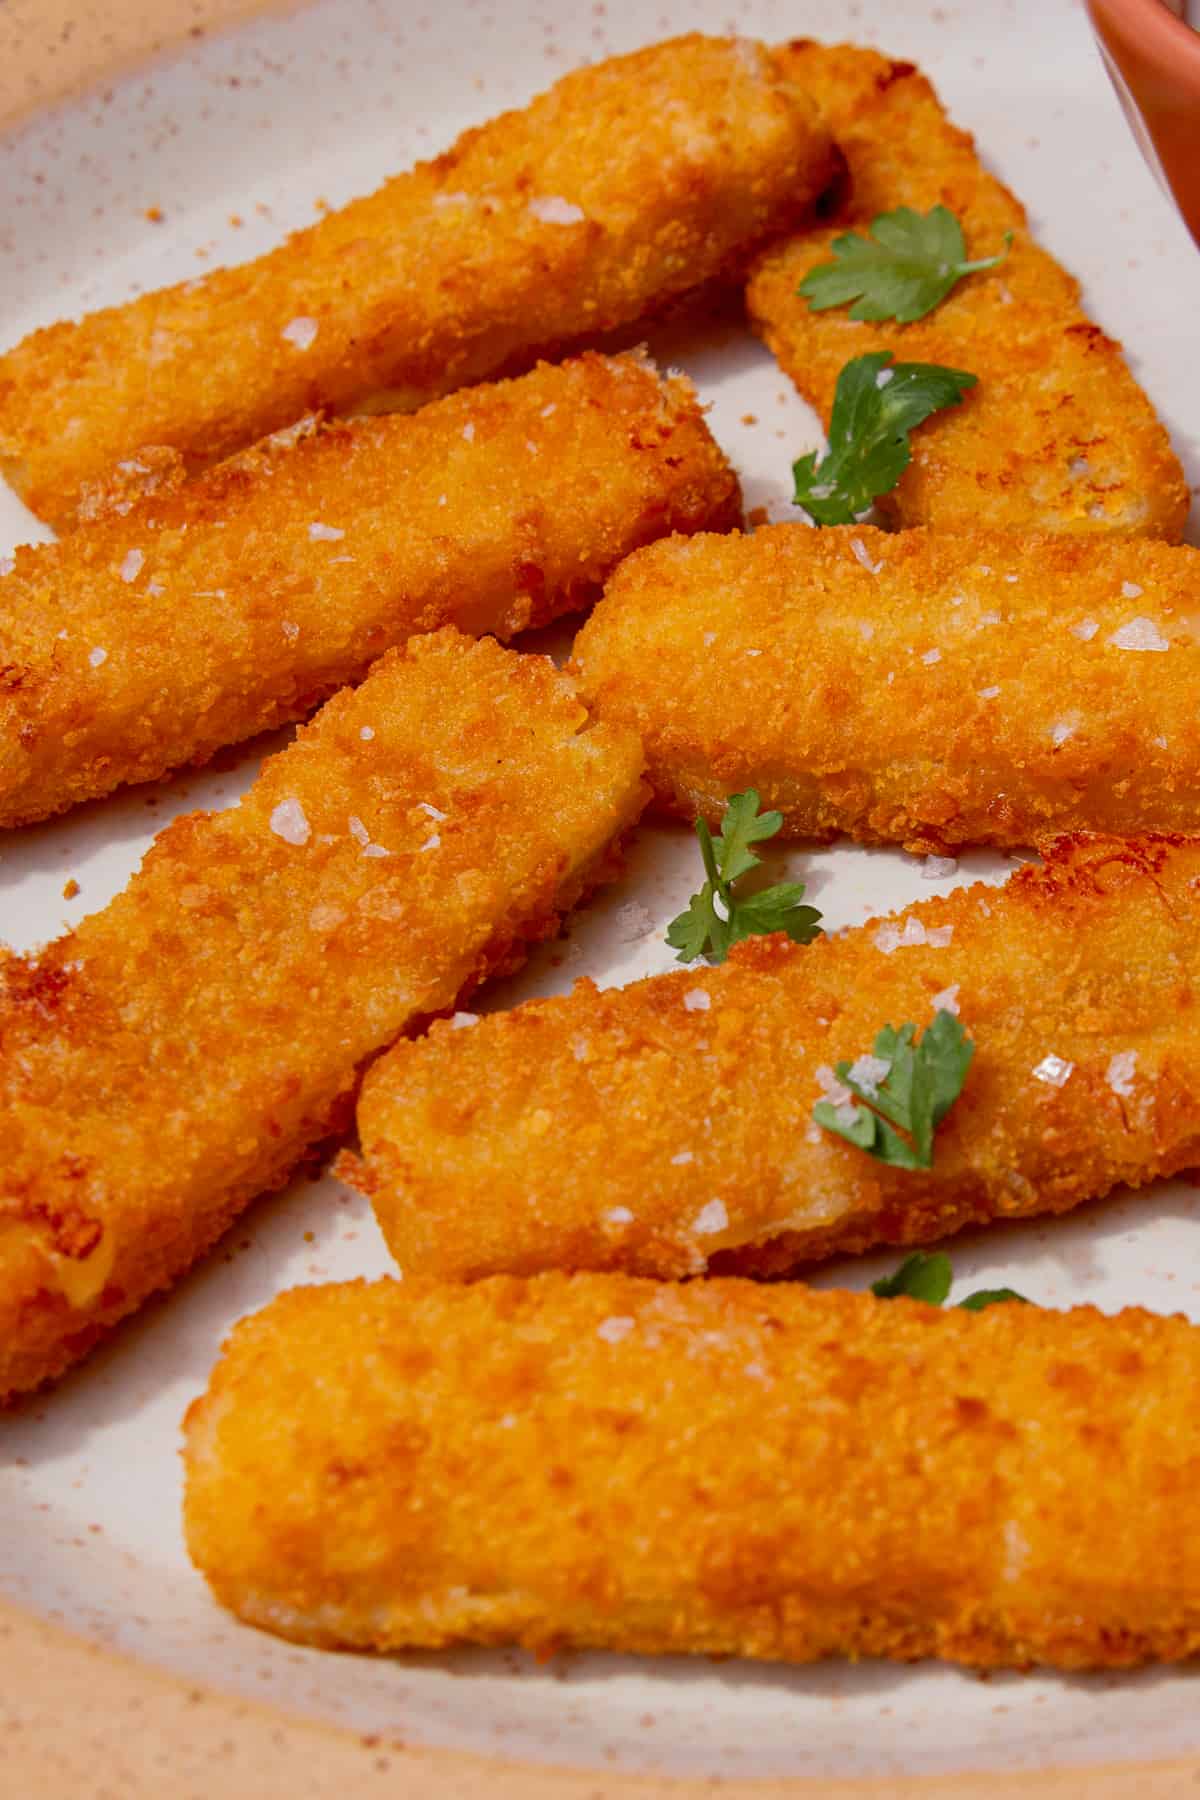 7 golden brown battered fish fingers on a plate topped with parsley.